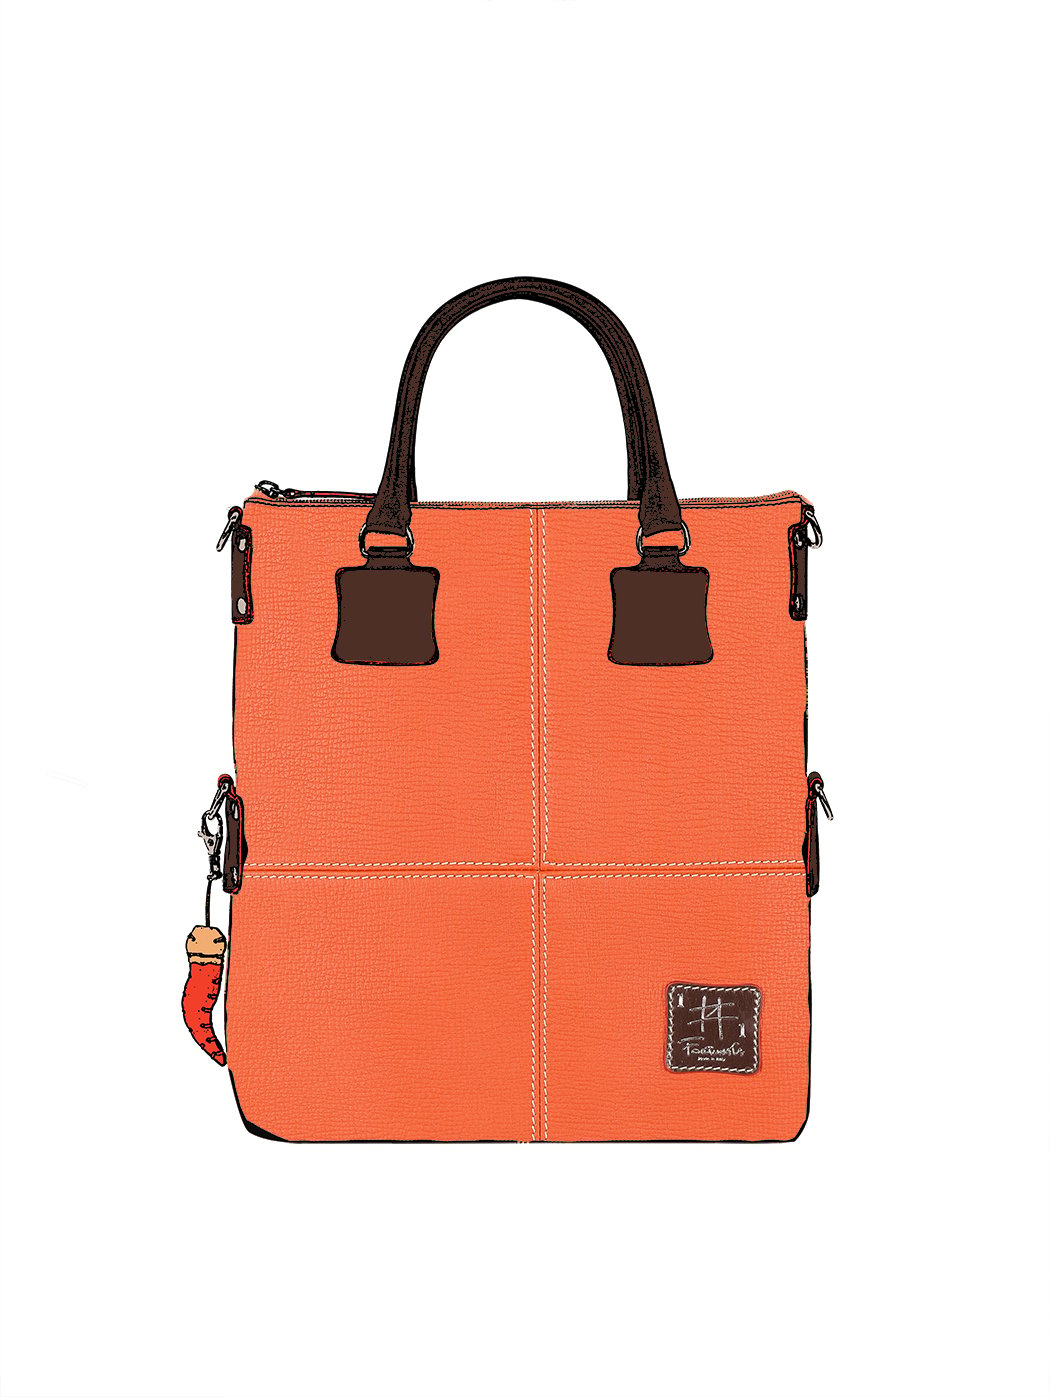 Large Tote Bag Leather Orange - Handmade in Italy